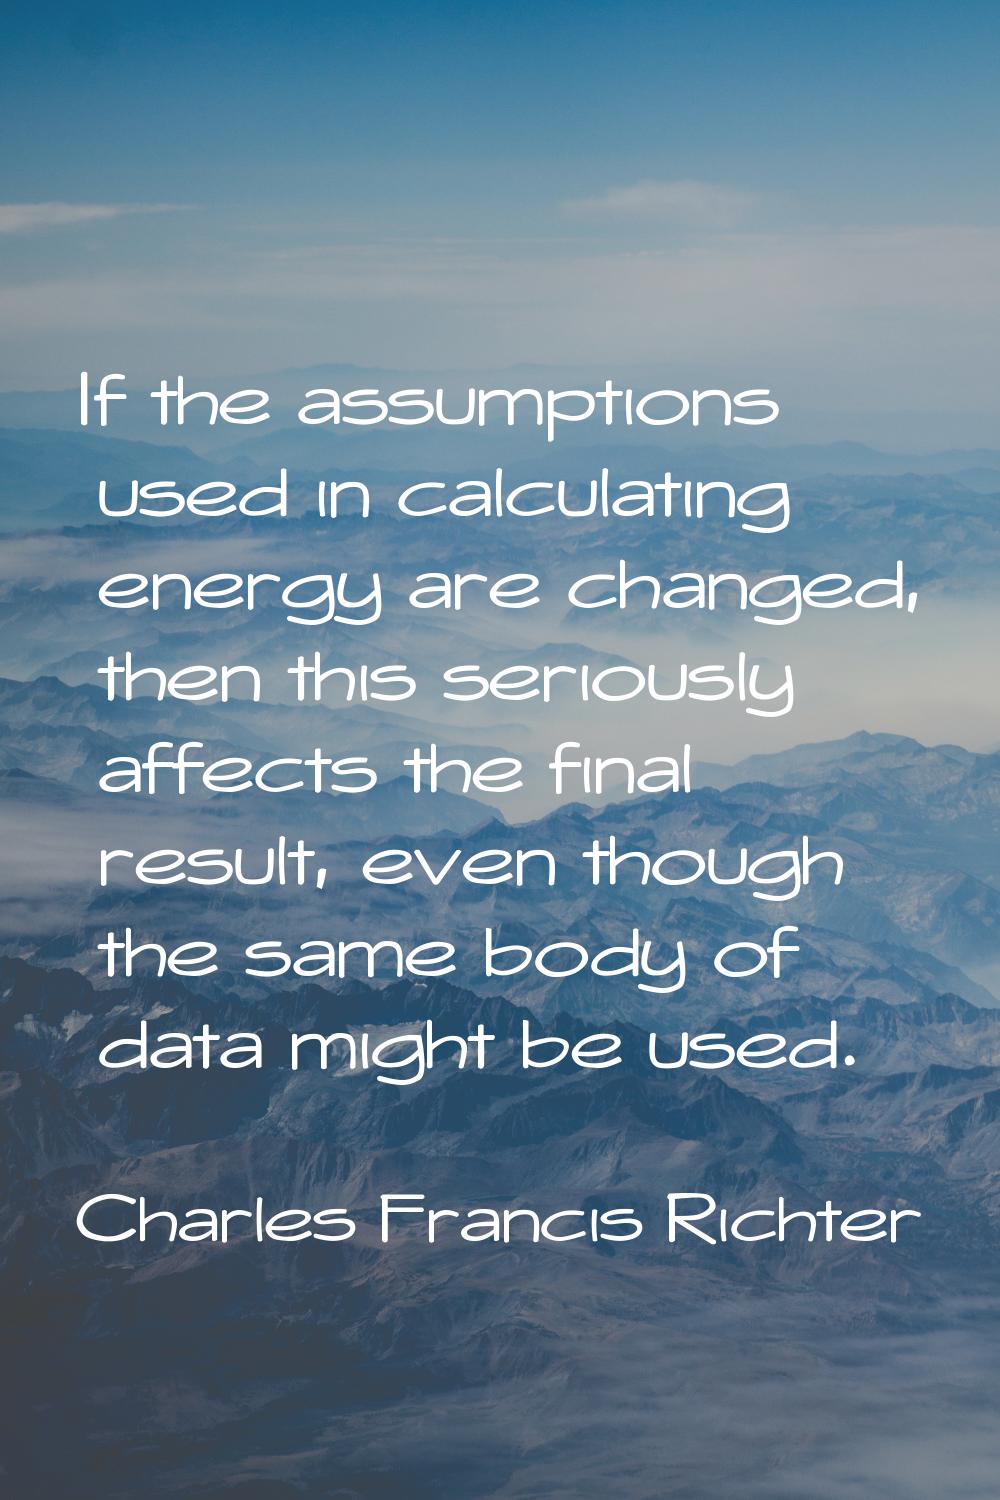 If the assumptions used in calculating energy are changed, then this seriously affects the final re